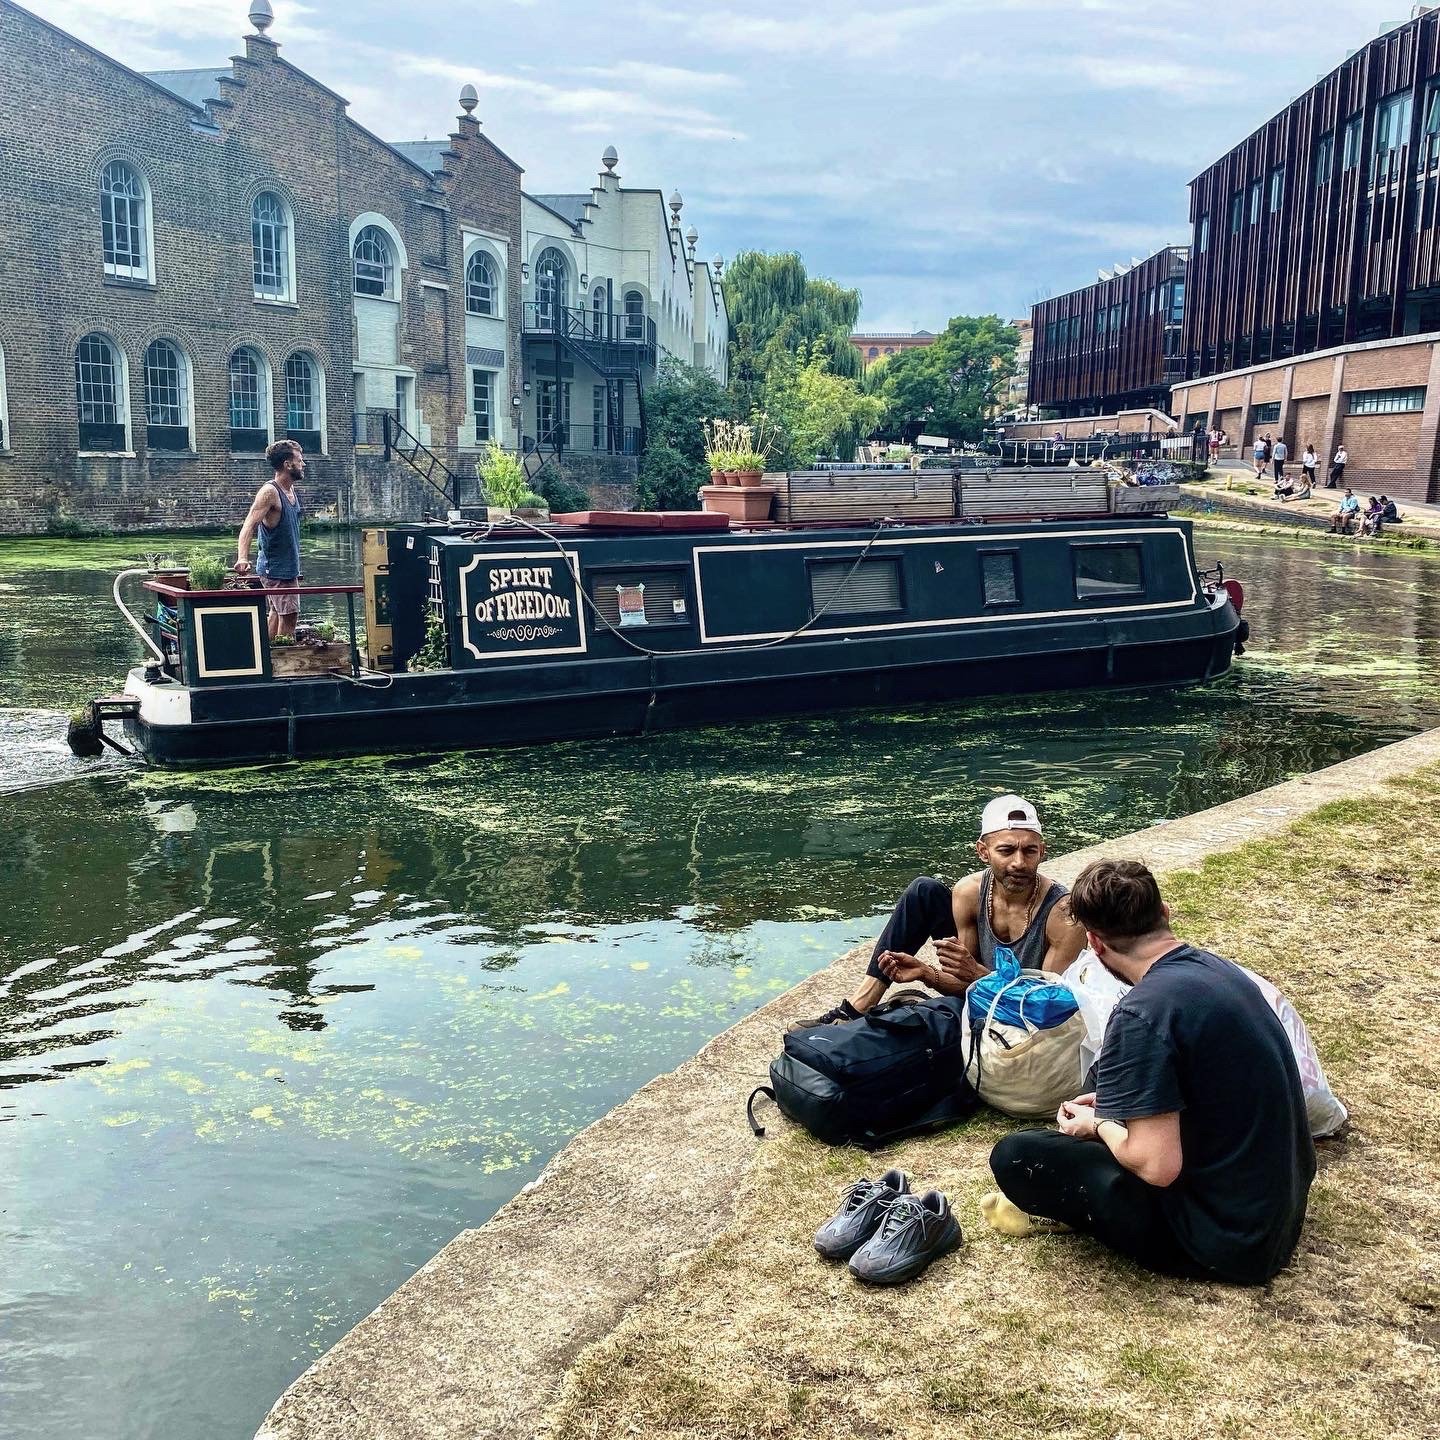  Fred, a London riverboat resident, maneuvers through the lock system on Regent’s Canal as people rest on the bank near Camden Town. 